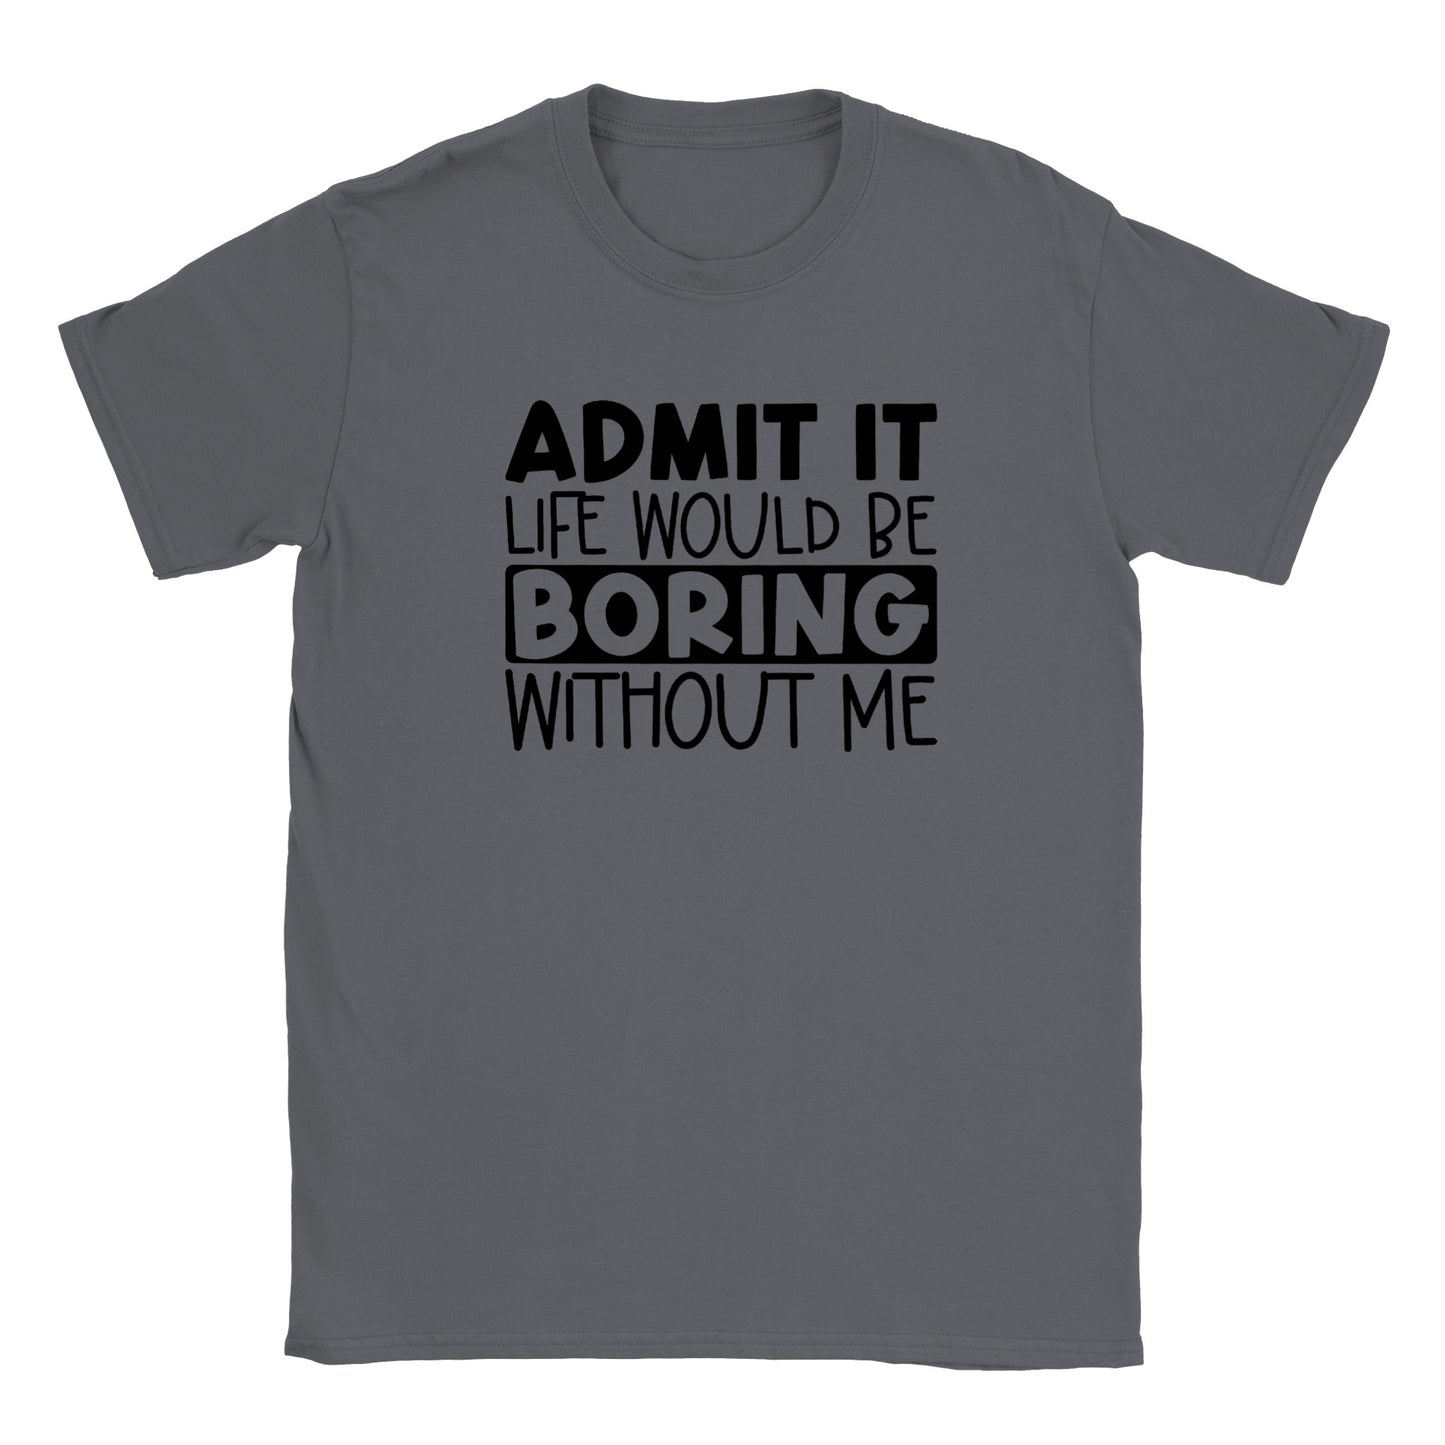 Admit It Life Would Be Boring Without Me - Classic Unisex Crewneck T-shirt - Mister Snarky's